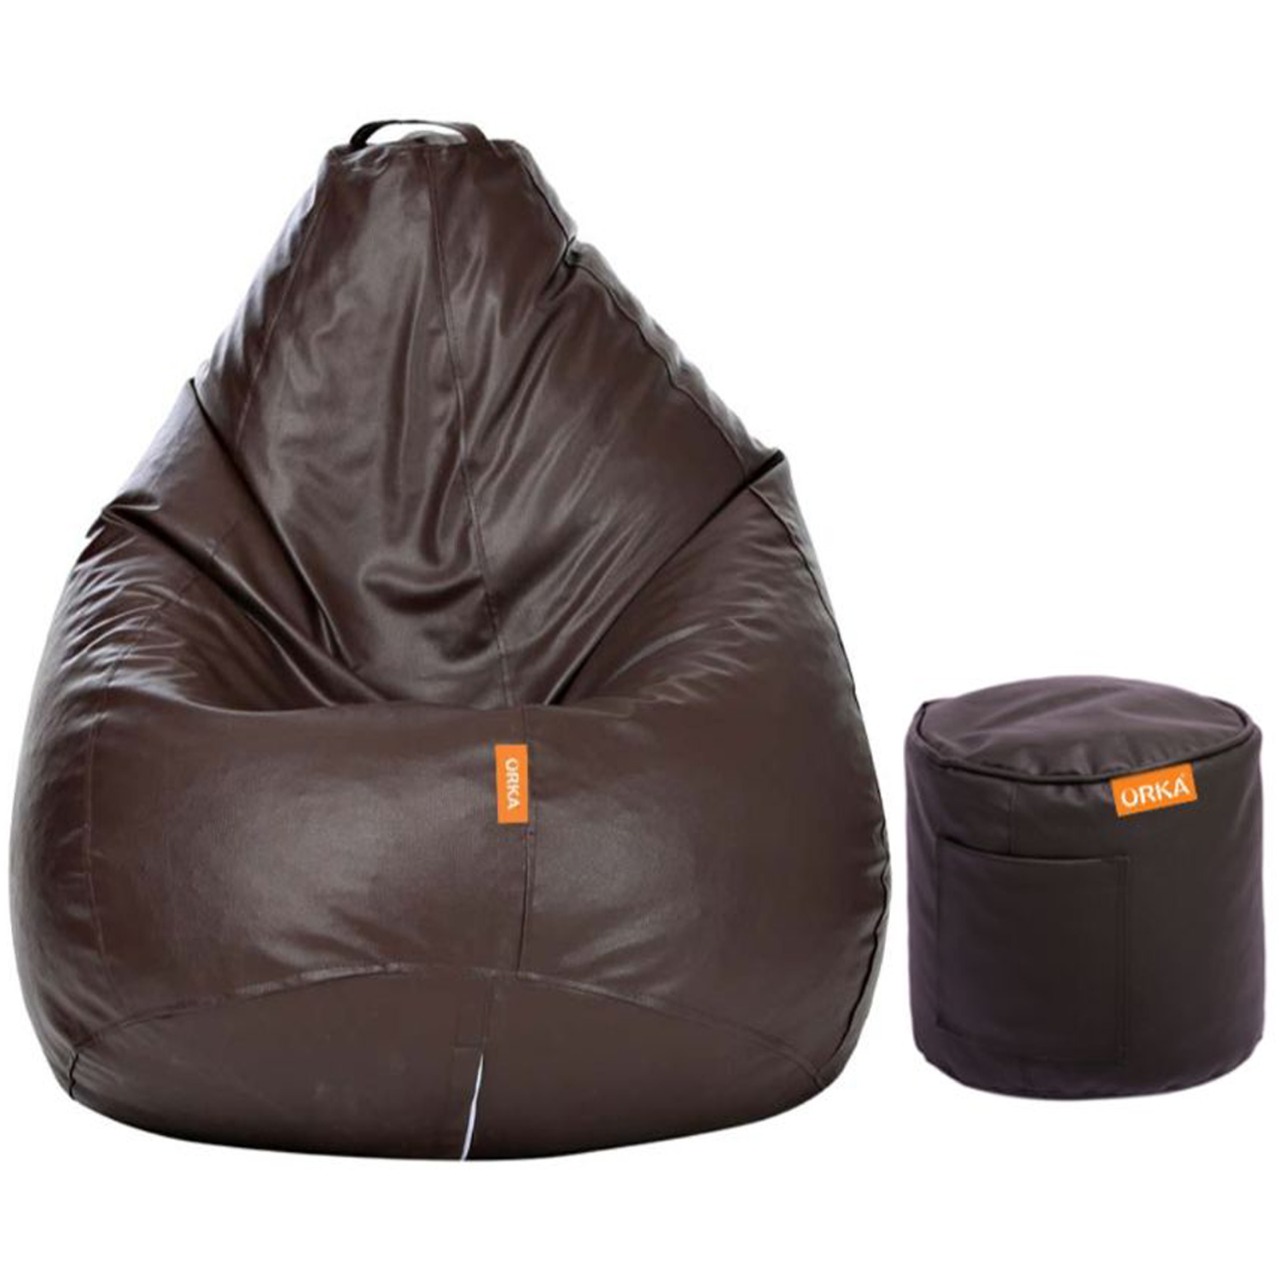 ORKA Classic Brown Bean Bag With Matching Puffy